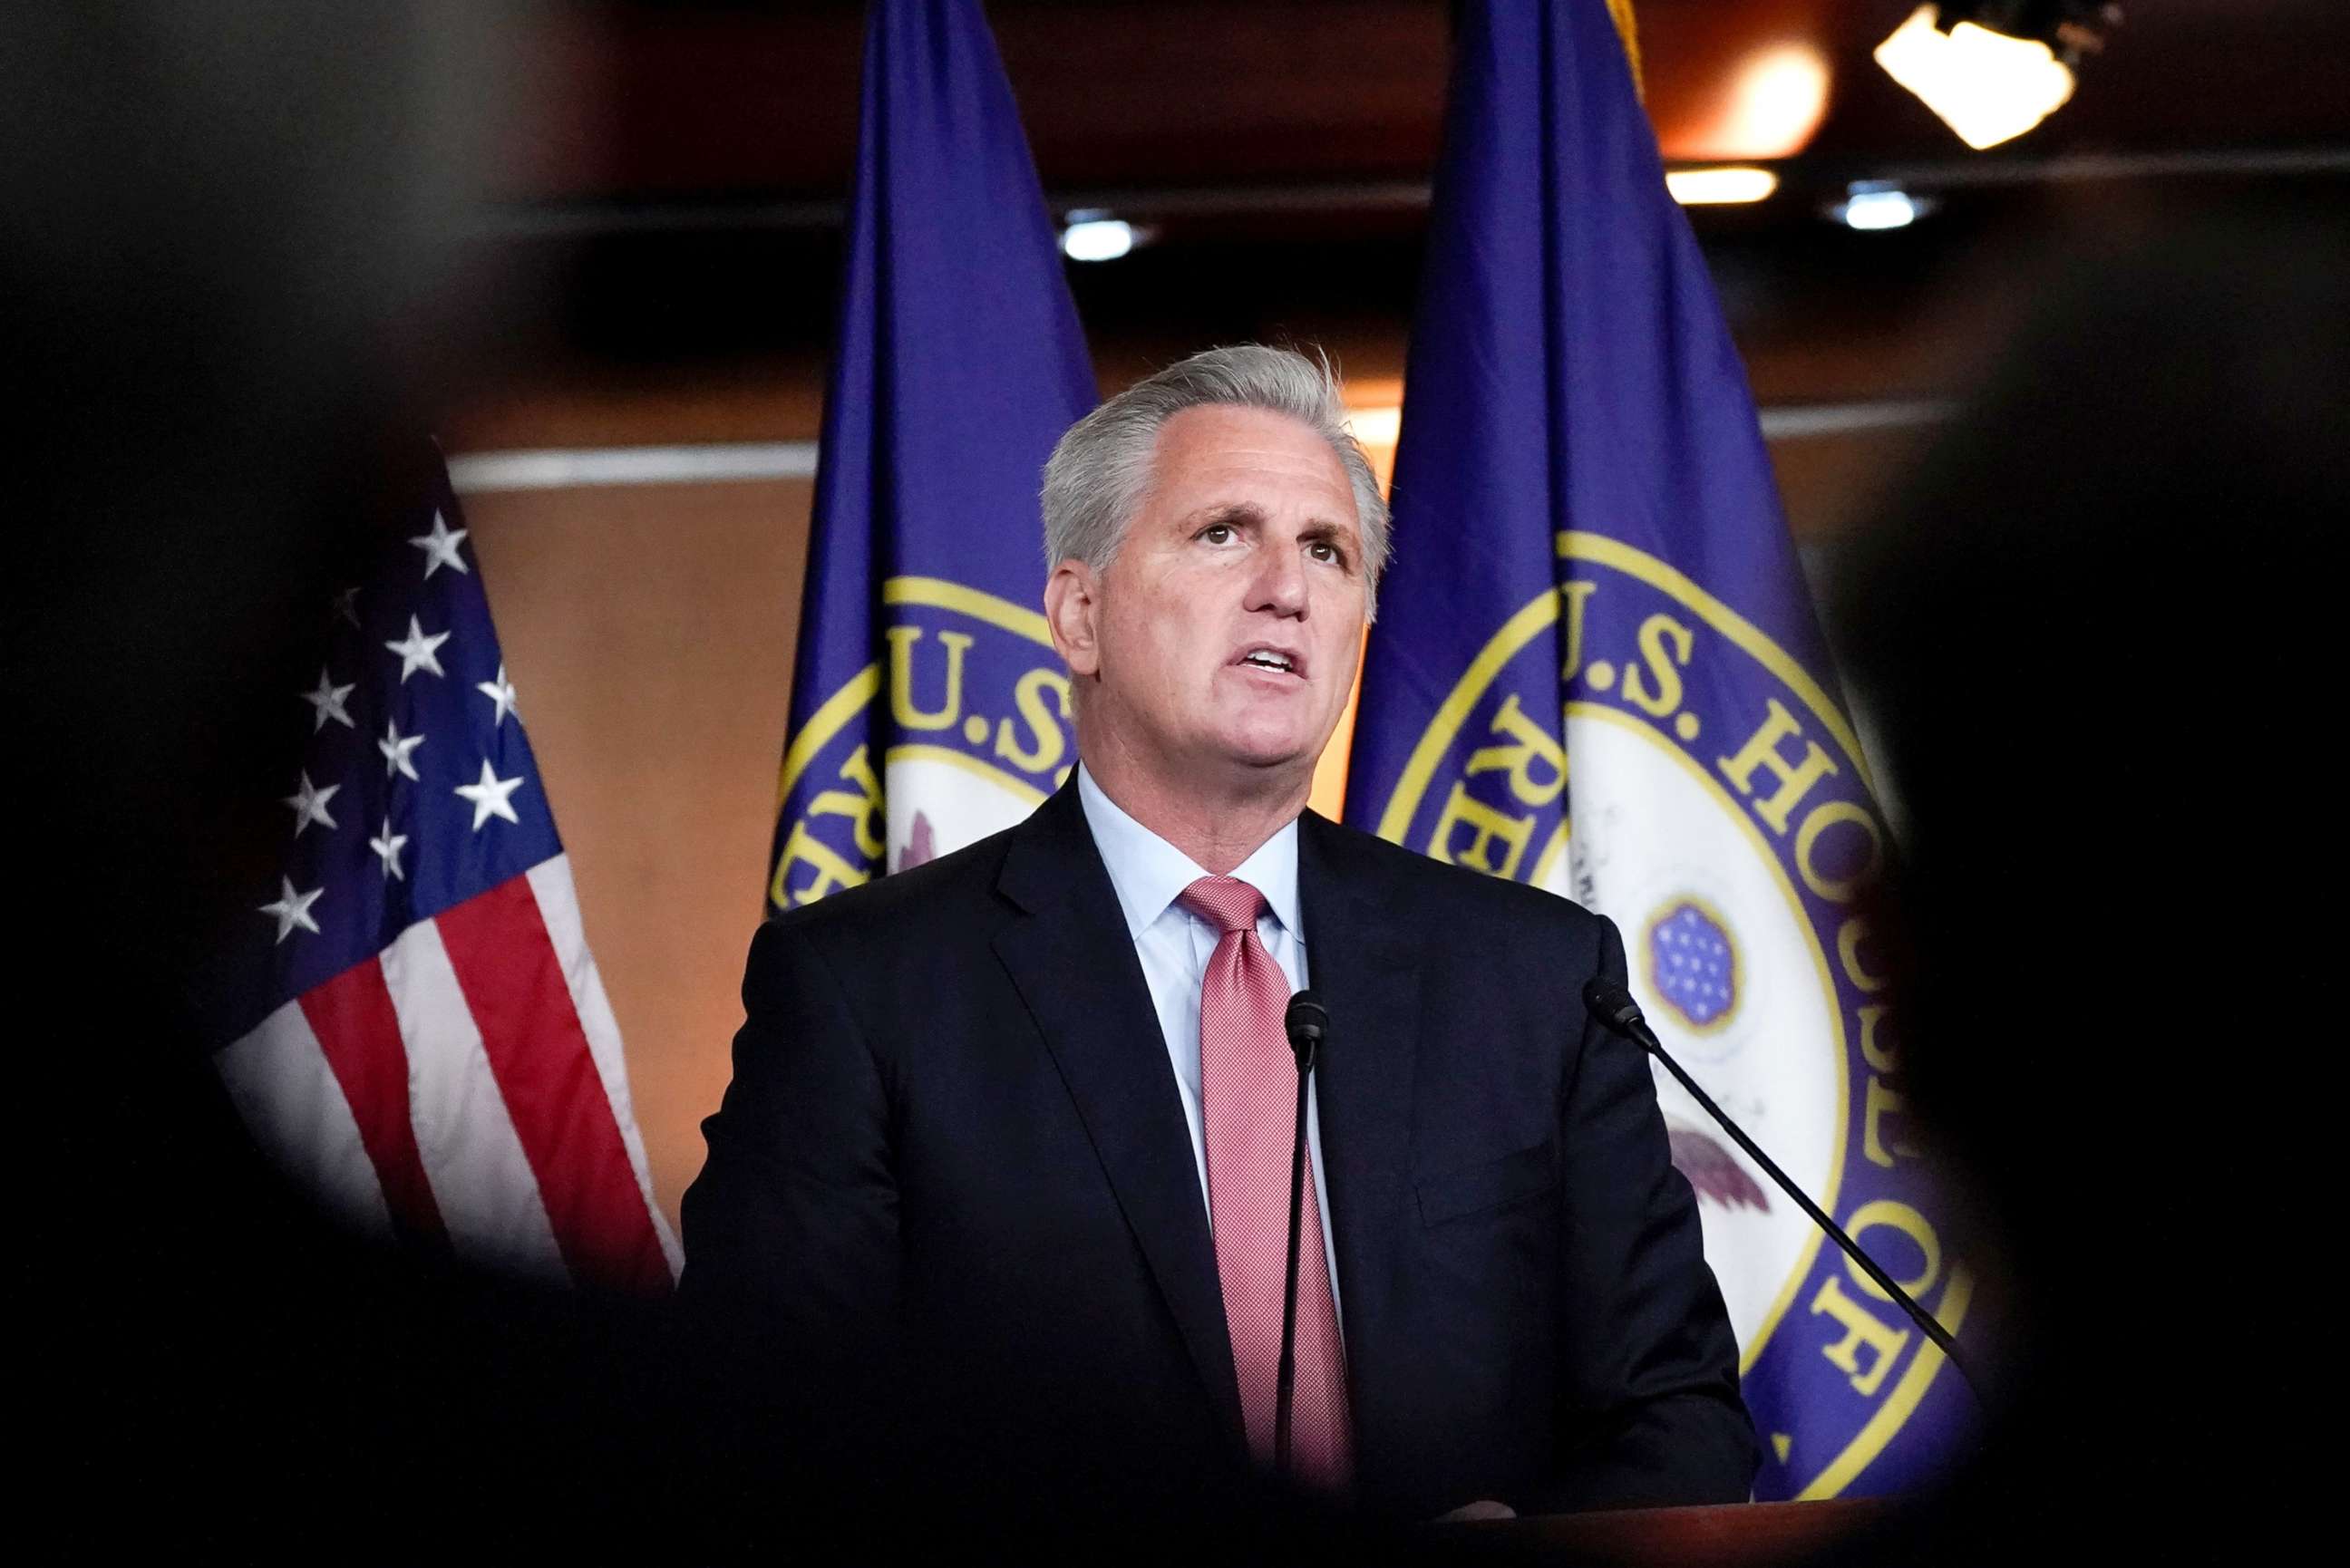 PHOTO: Minority Leader Kevin McCarthy listens to questions as he holds a news conference at the U.S. Capitol in Washington, D.C., July 22, 2021.